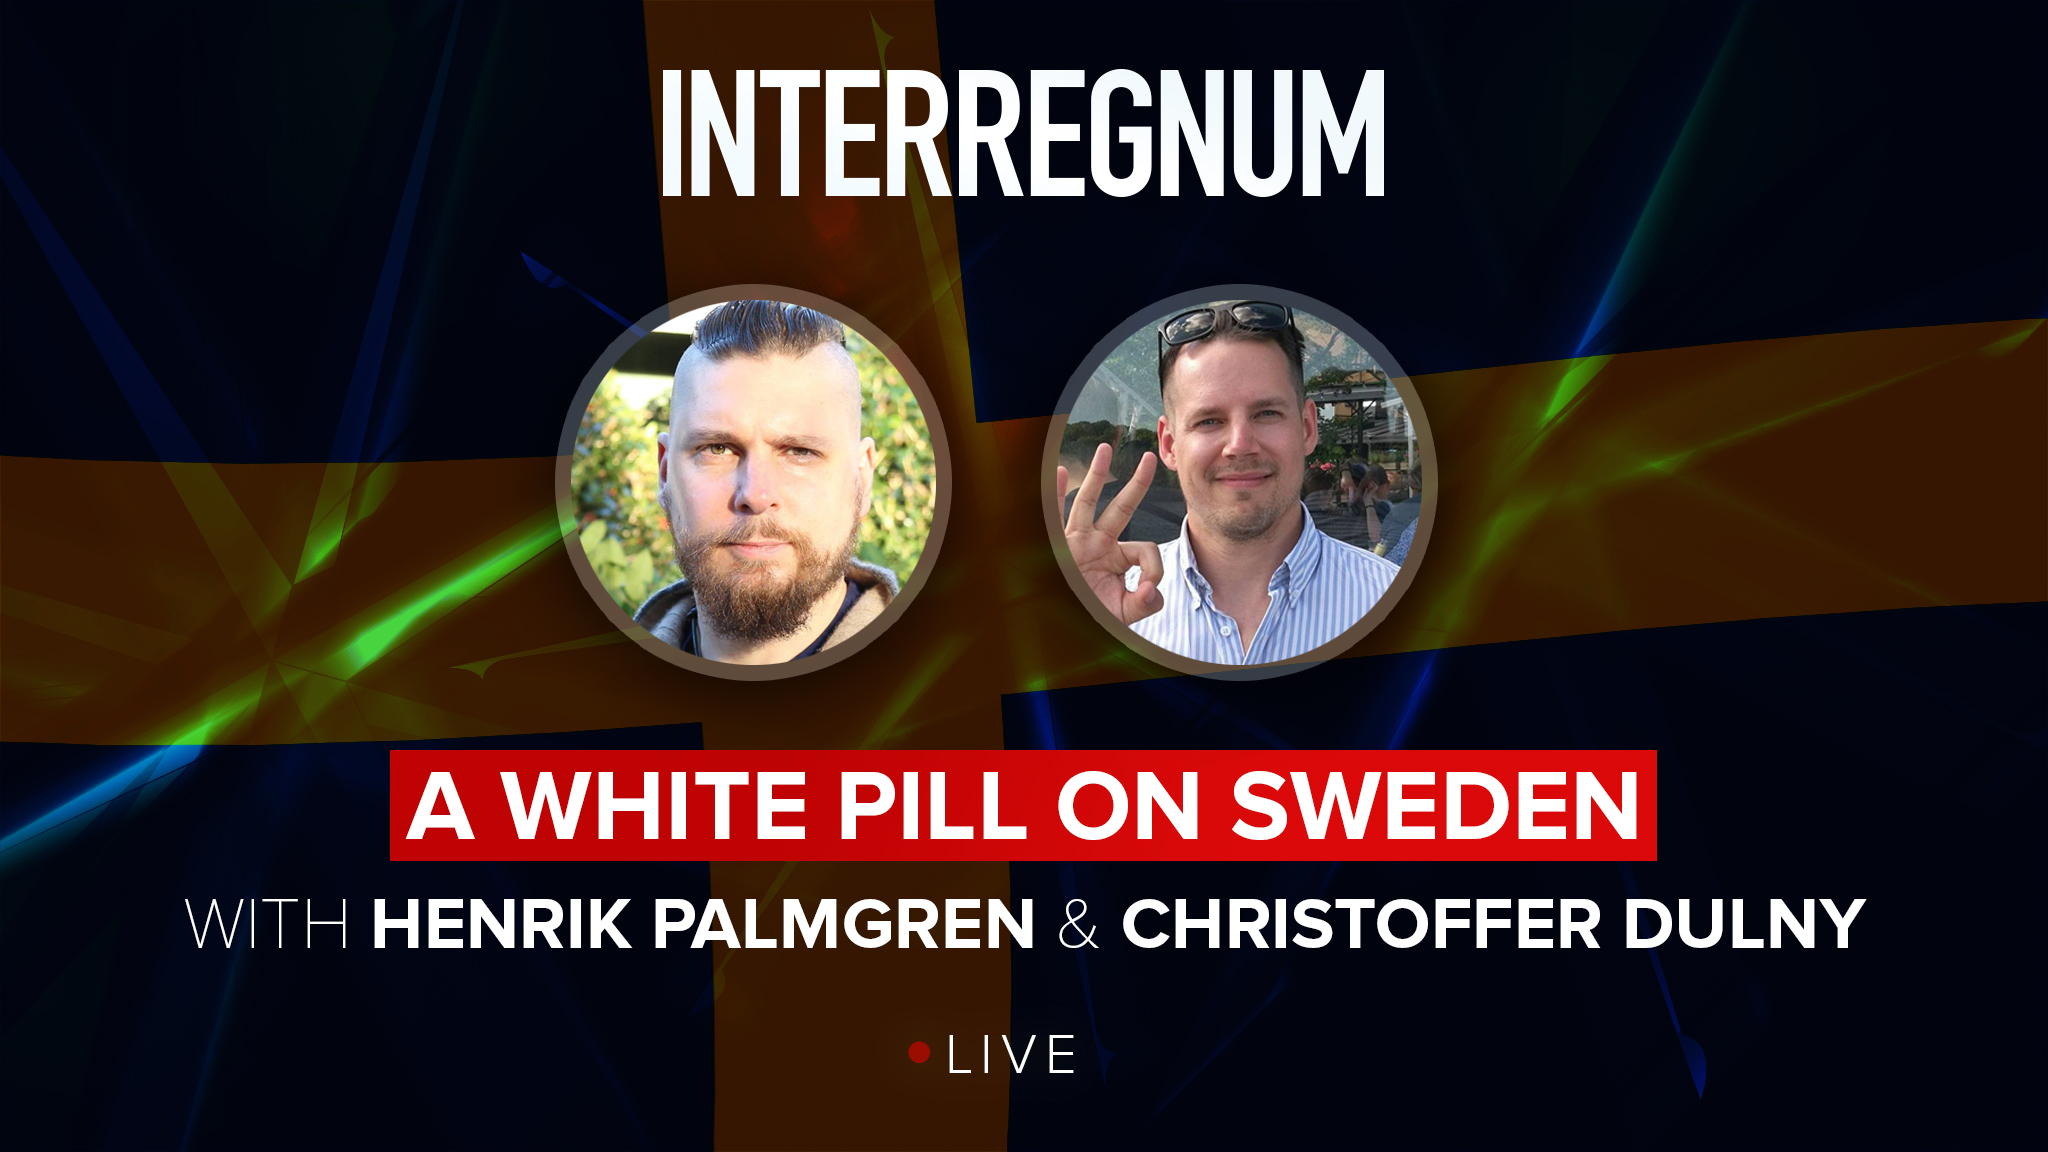 A White Pill on Sweden with Henrik Palmgren and Christoffer Dulny